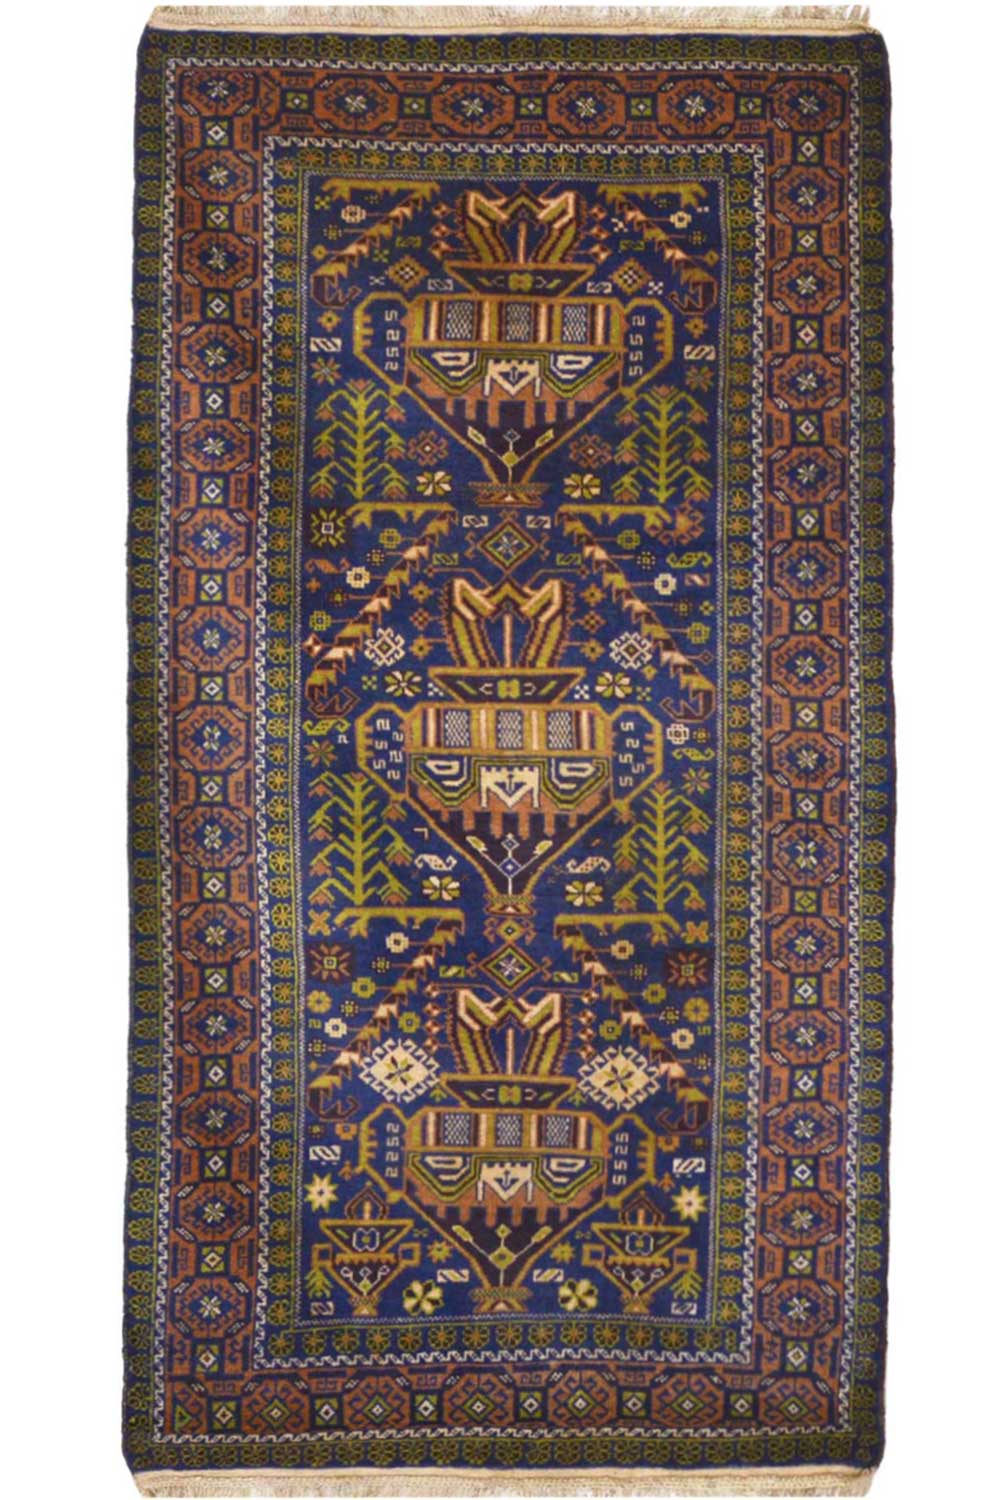 Pictures Of Egyptian Rugs 95